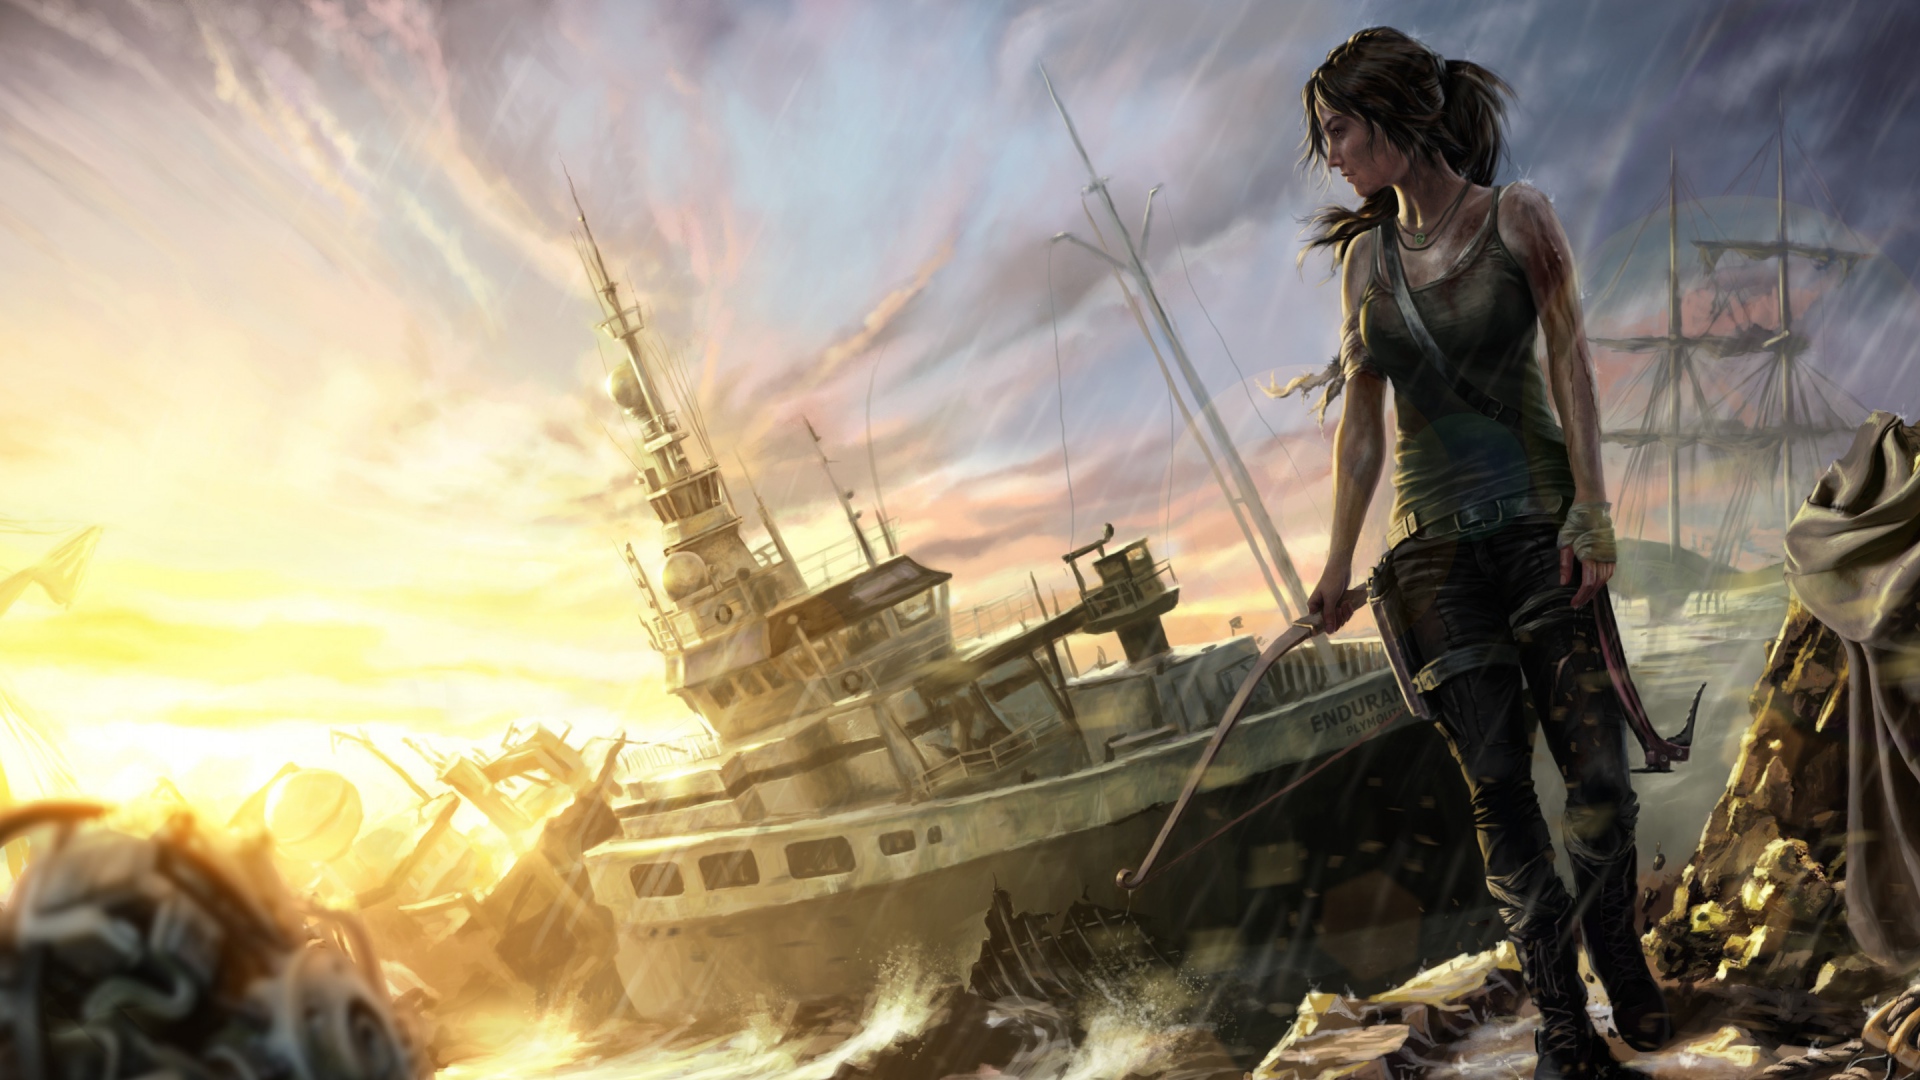 HD Tomb Raider Backgrounds